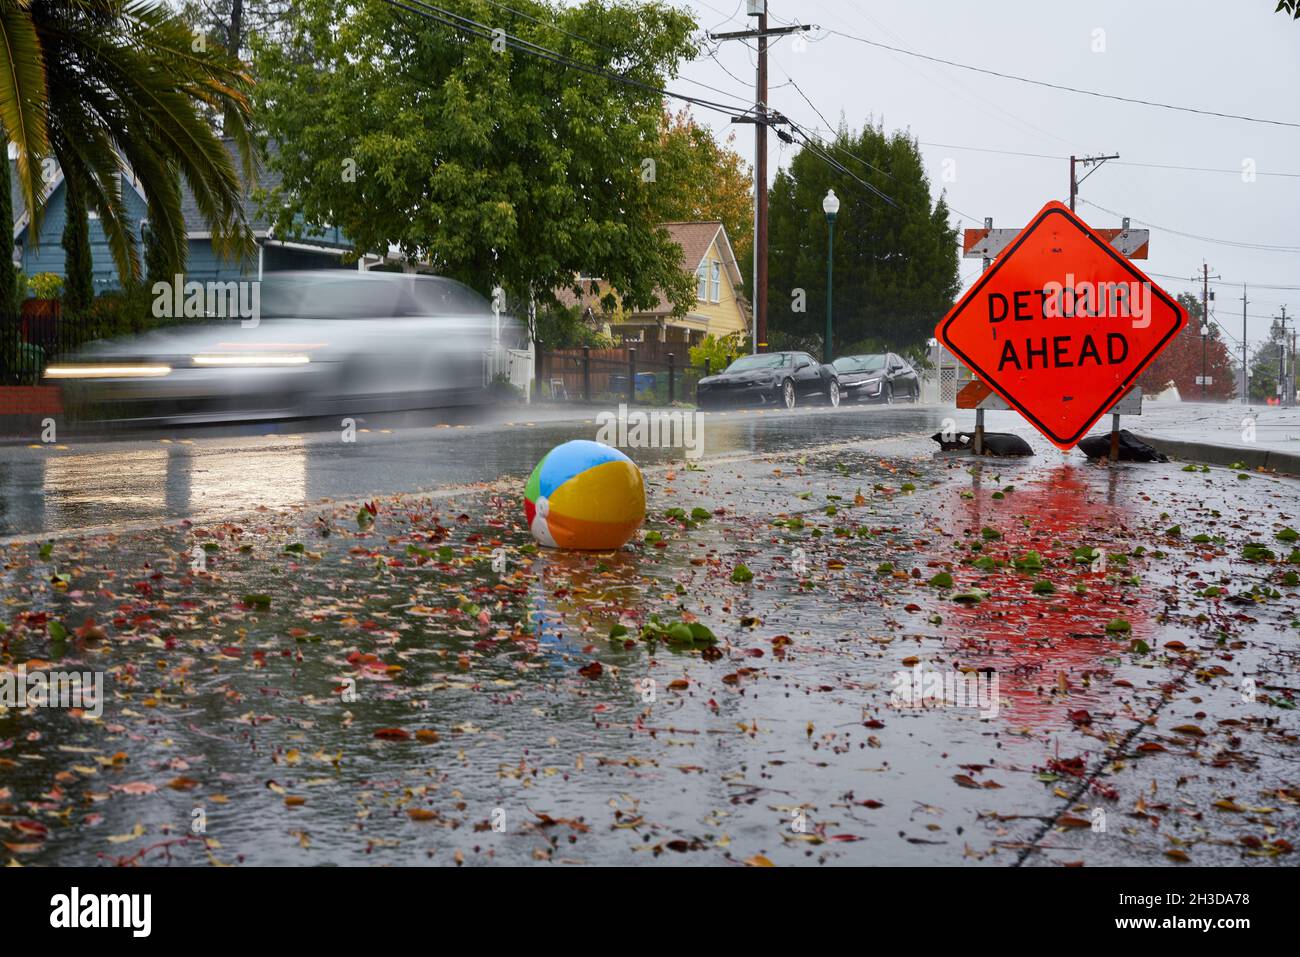 Car drives on wet street with a detour sign, fallen leaves and beach ball, in Windsor, California. Slow shutter shot with motion blur. Stock Photo